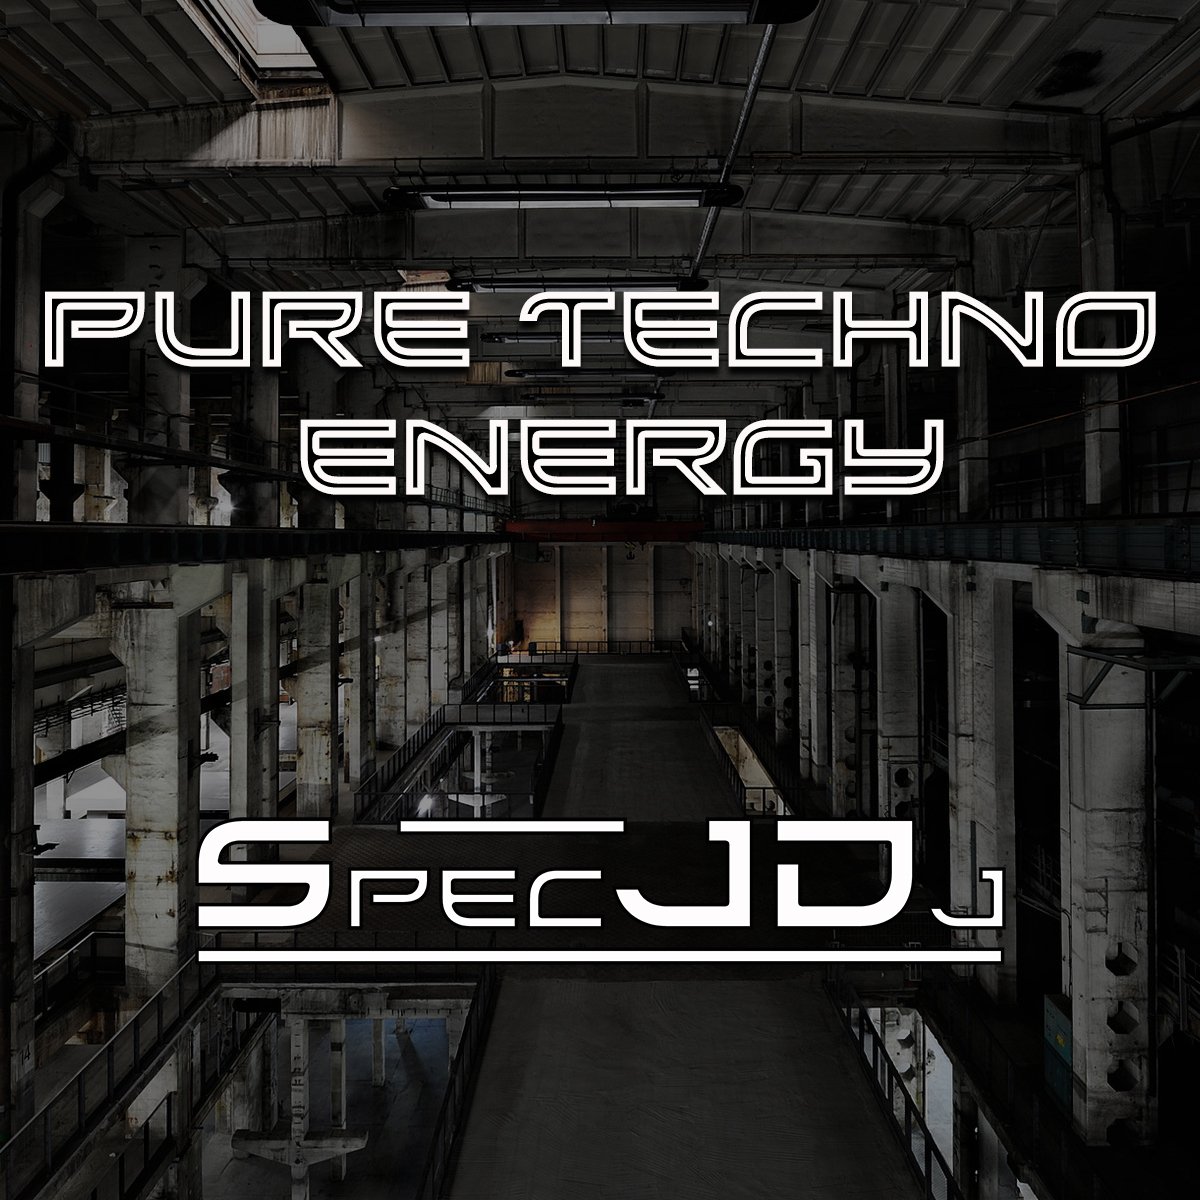 Pure Techno Energy :: Pure Techno Energy #14 by Spec J Dj (aired on February 1st, 2019) banner logo